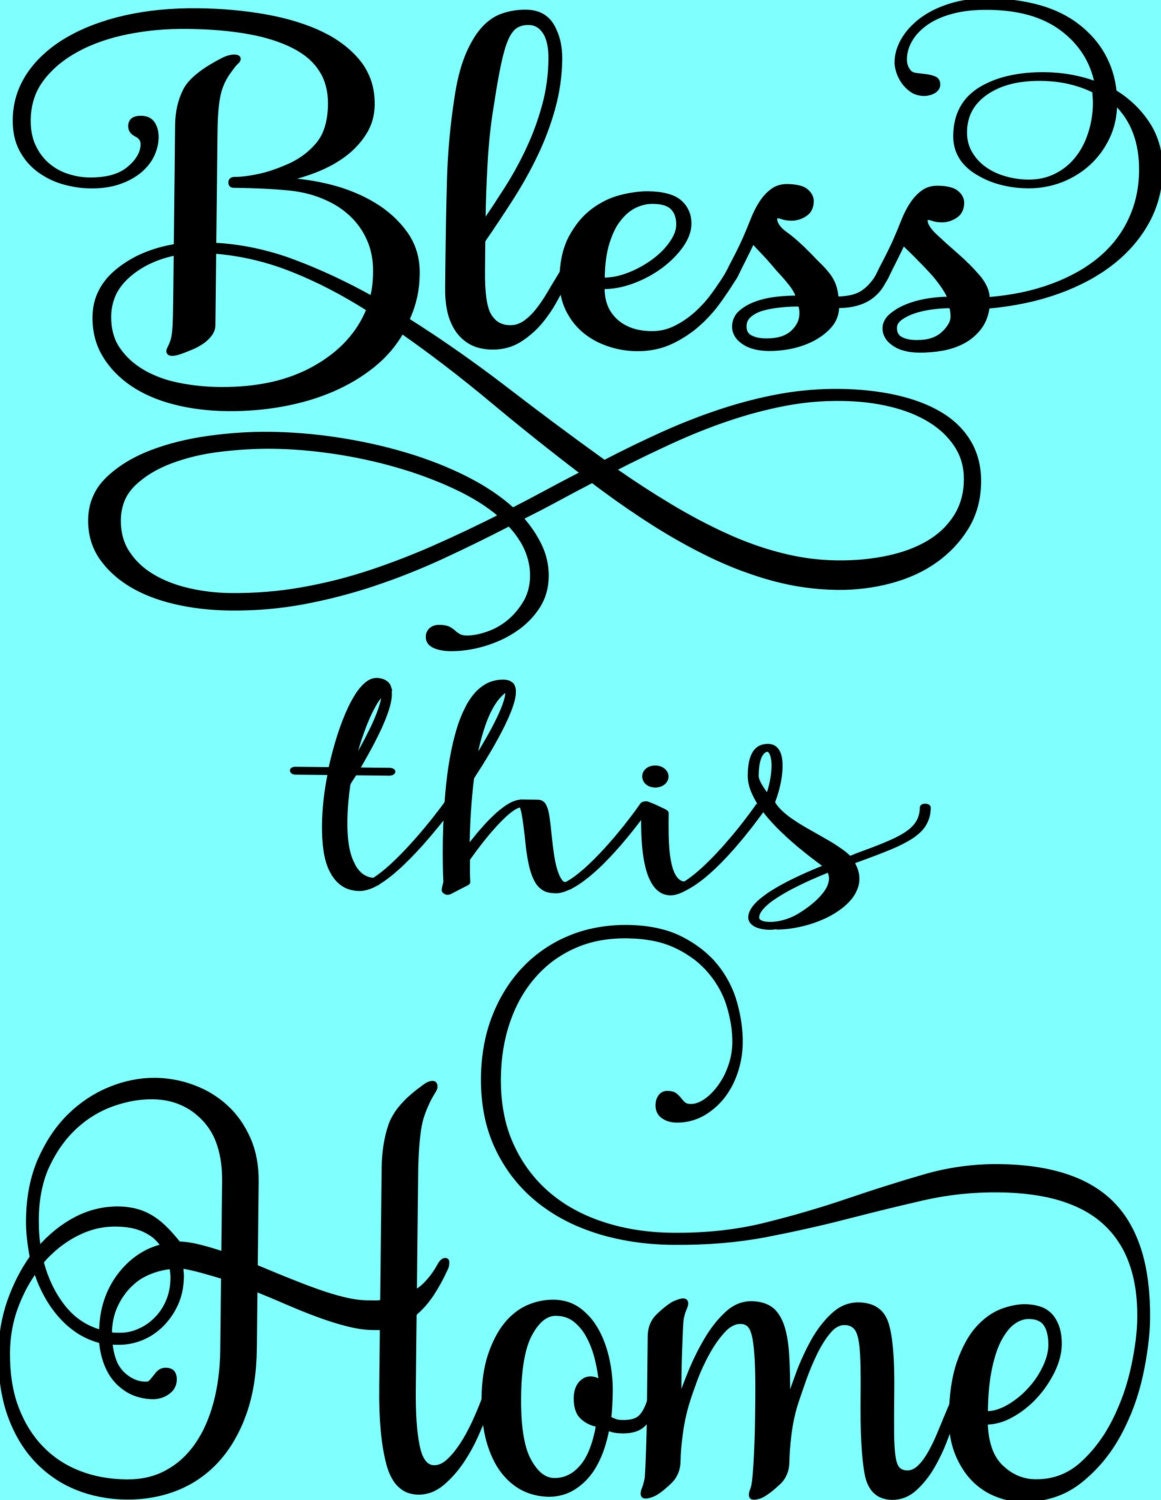 Download Bless This Home Cut File SVG by ArtForTheMostPart on Etsy